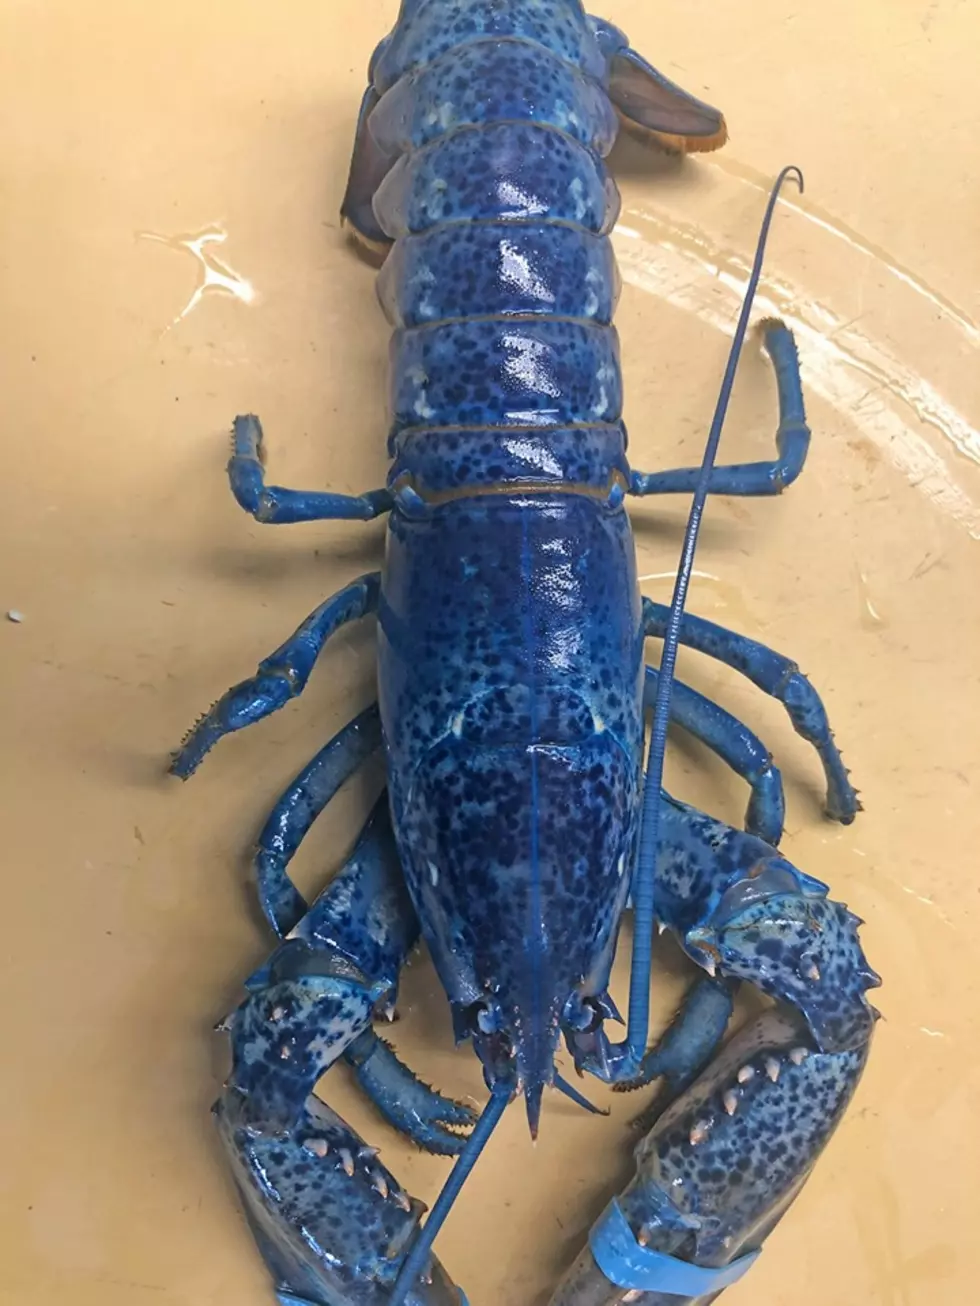 Feast Your Eyes On This Rare, Bright Blue Lobster